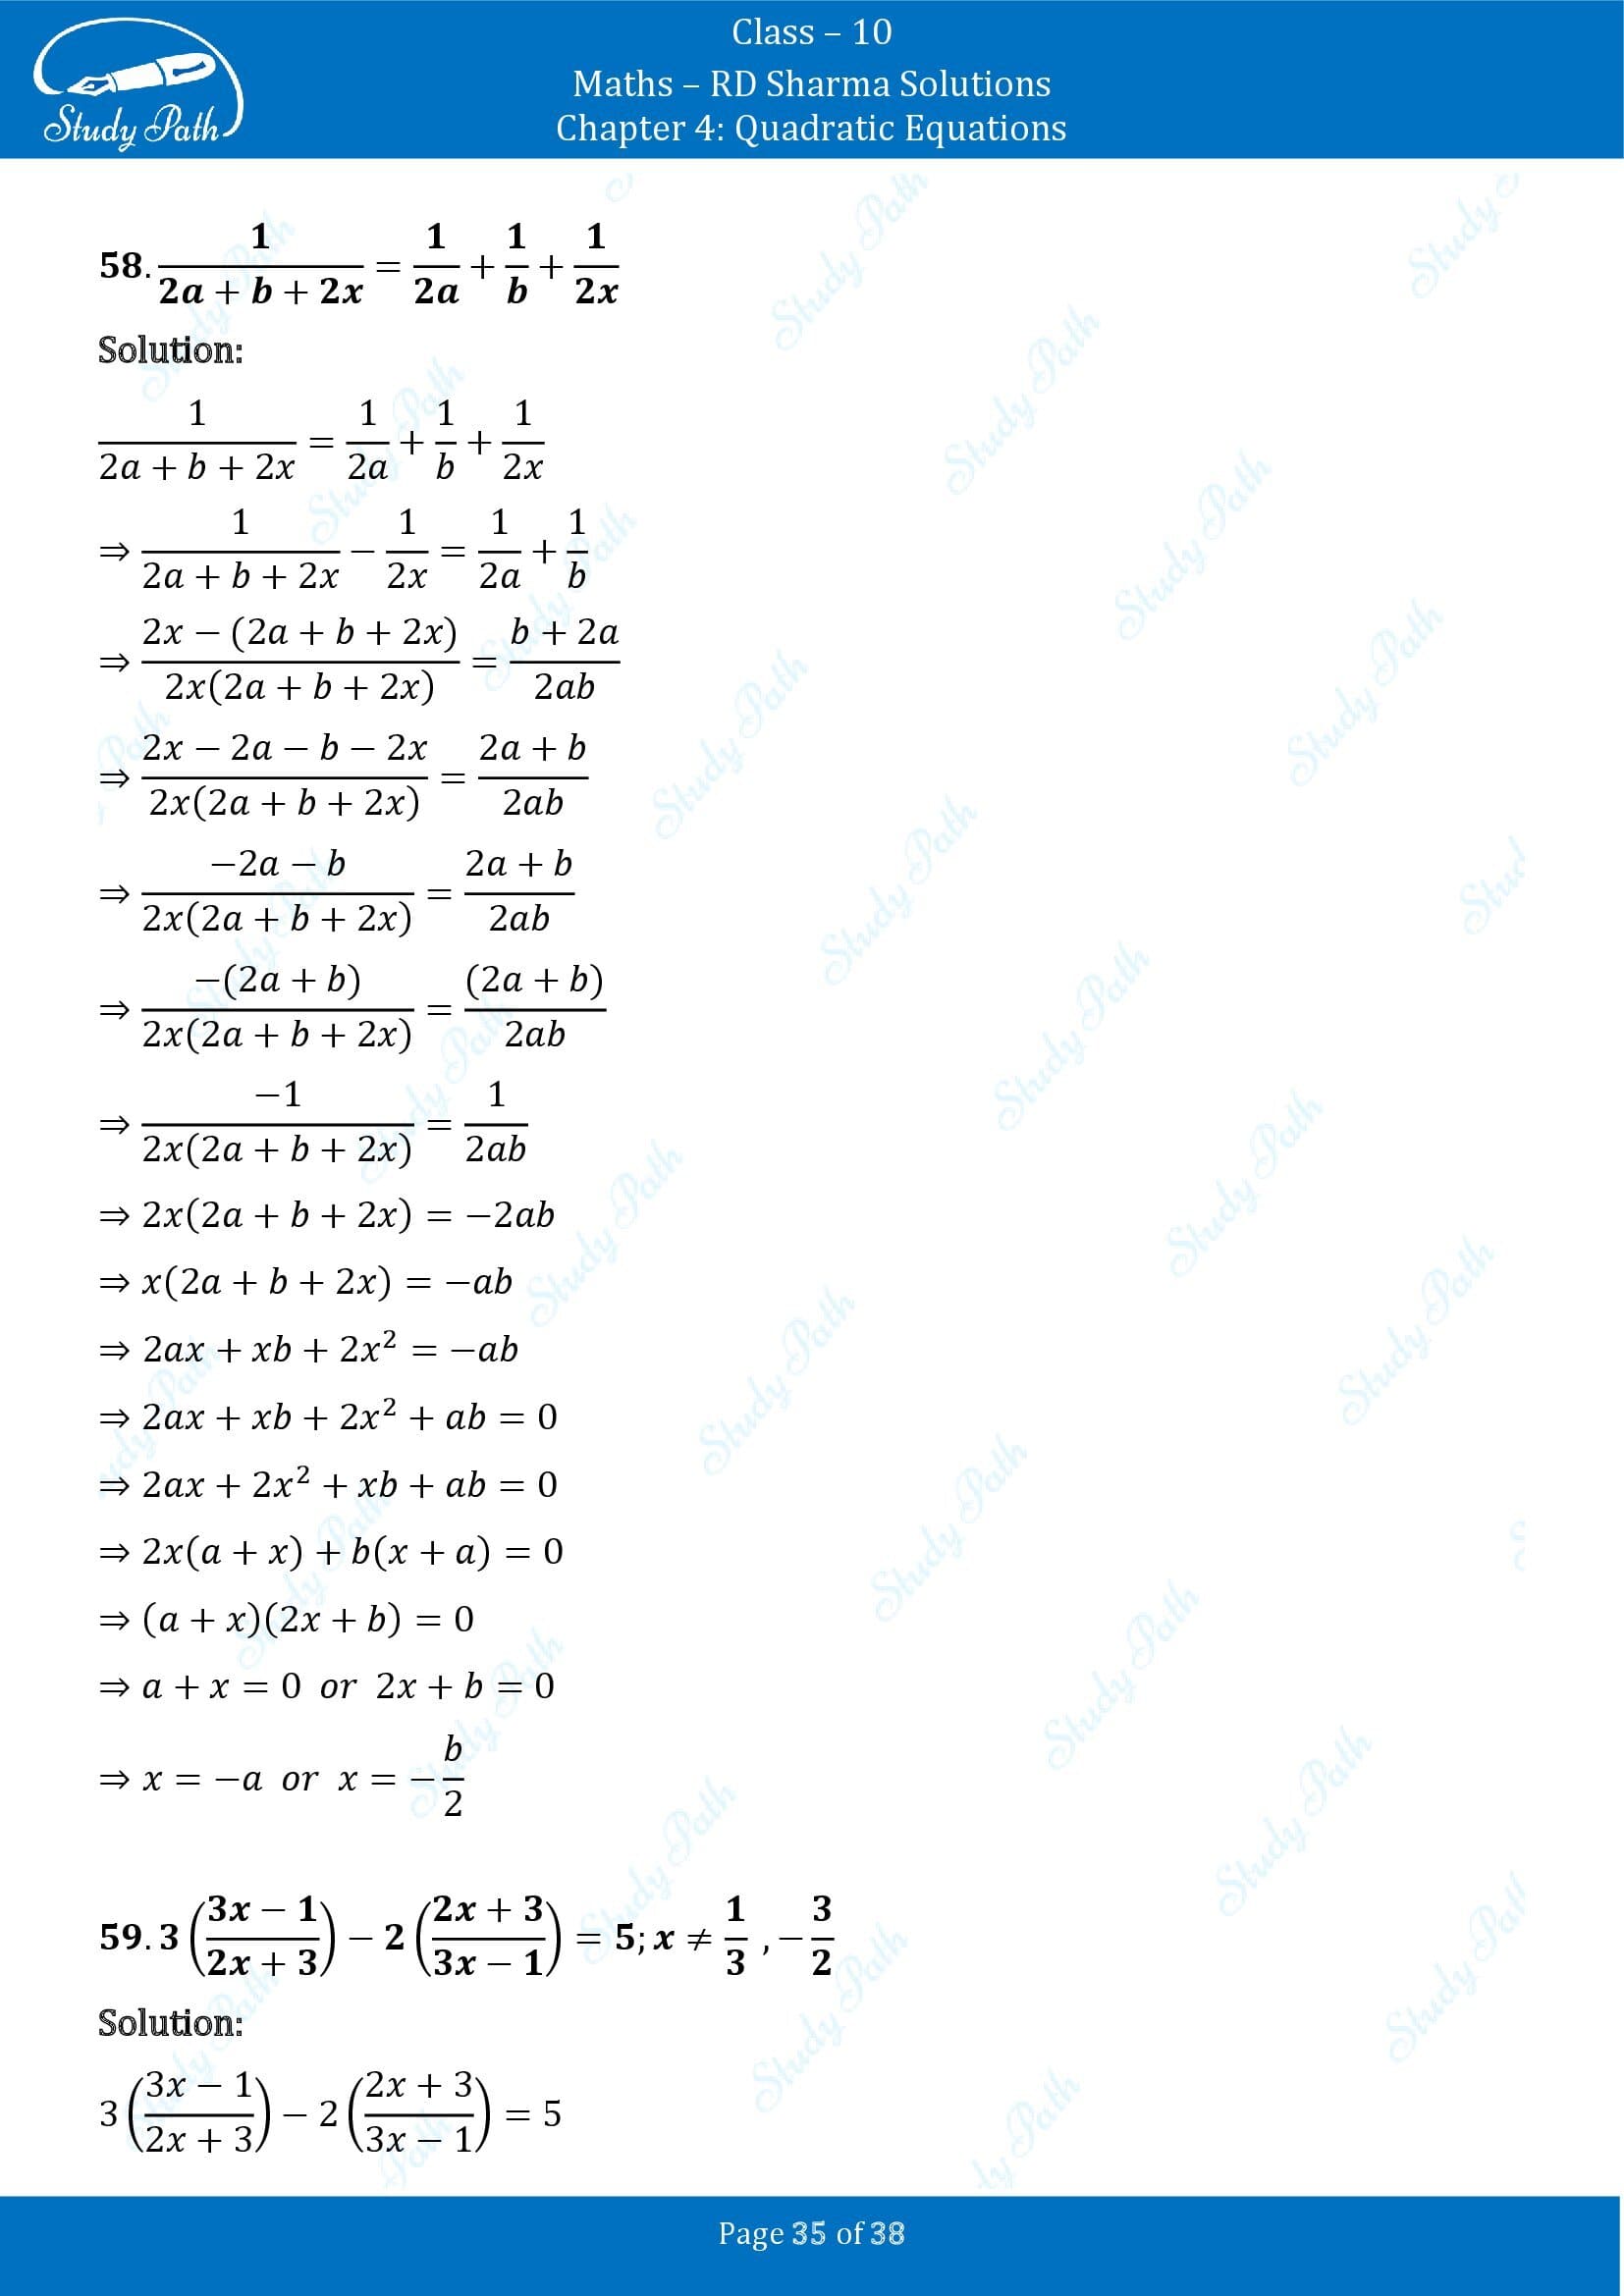 RD Sharma Solutions Class 10 Chapter 4 Quadratic Equations Exercise 4.3 00035